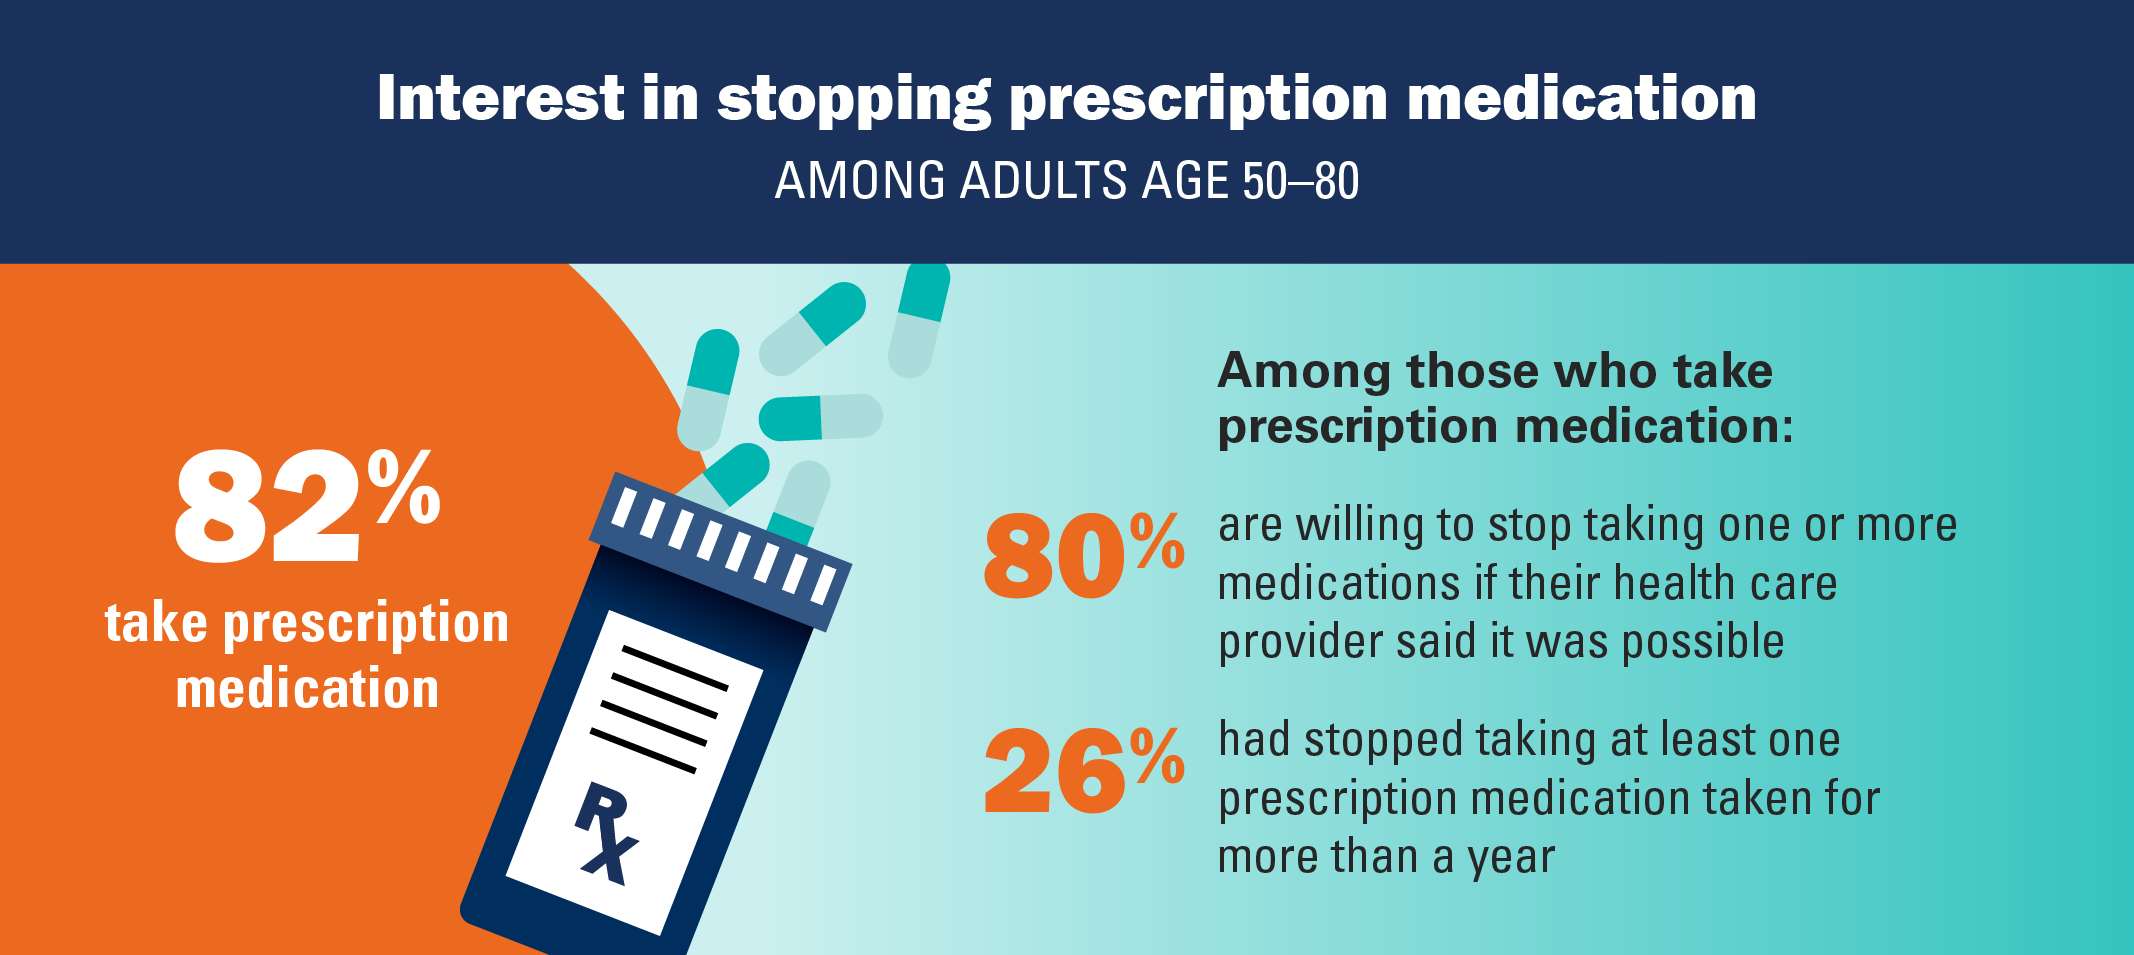 Interest in stopping prescription medication among adults age 50-80